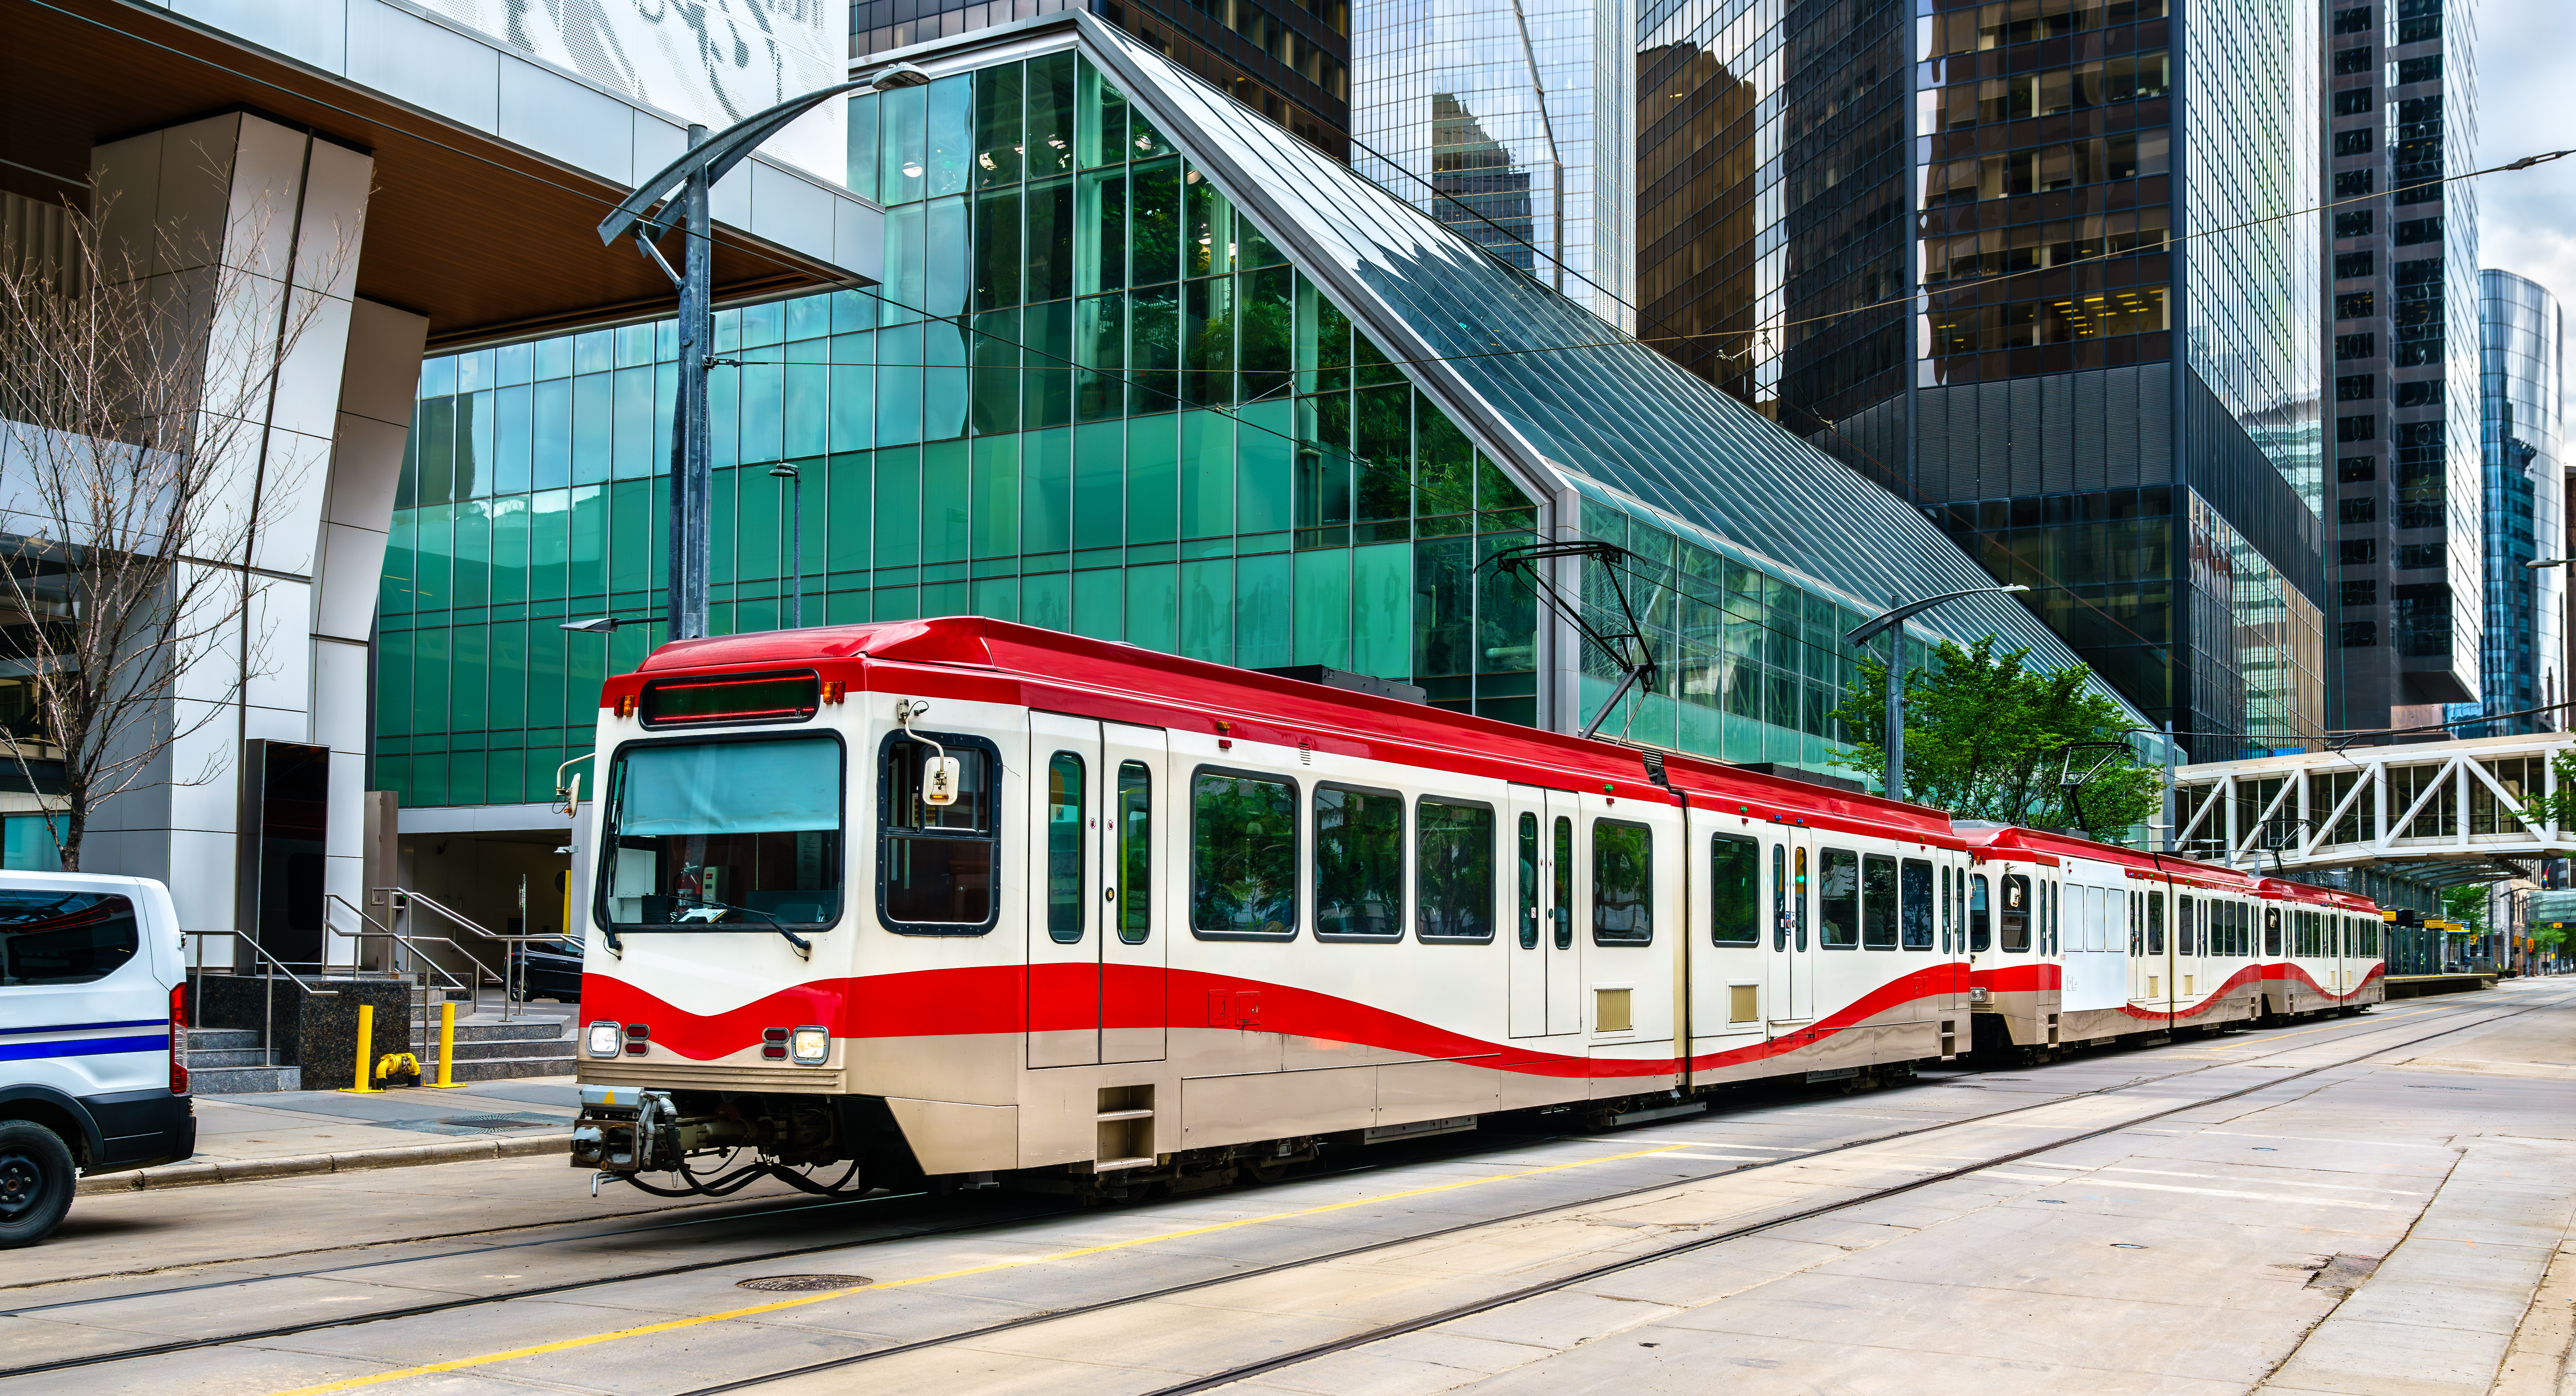 A red and white CTrain car glides along an outdoor light rail track in downtown Calgary. In the centre of the image is a brushstroke overlay with the text: Get on Board!